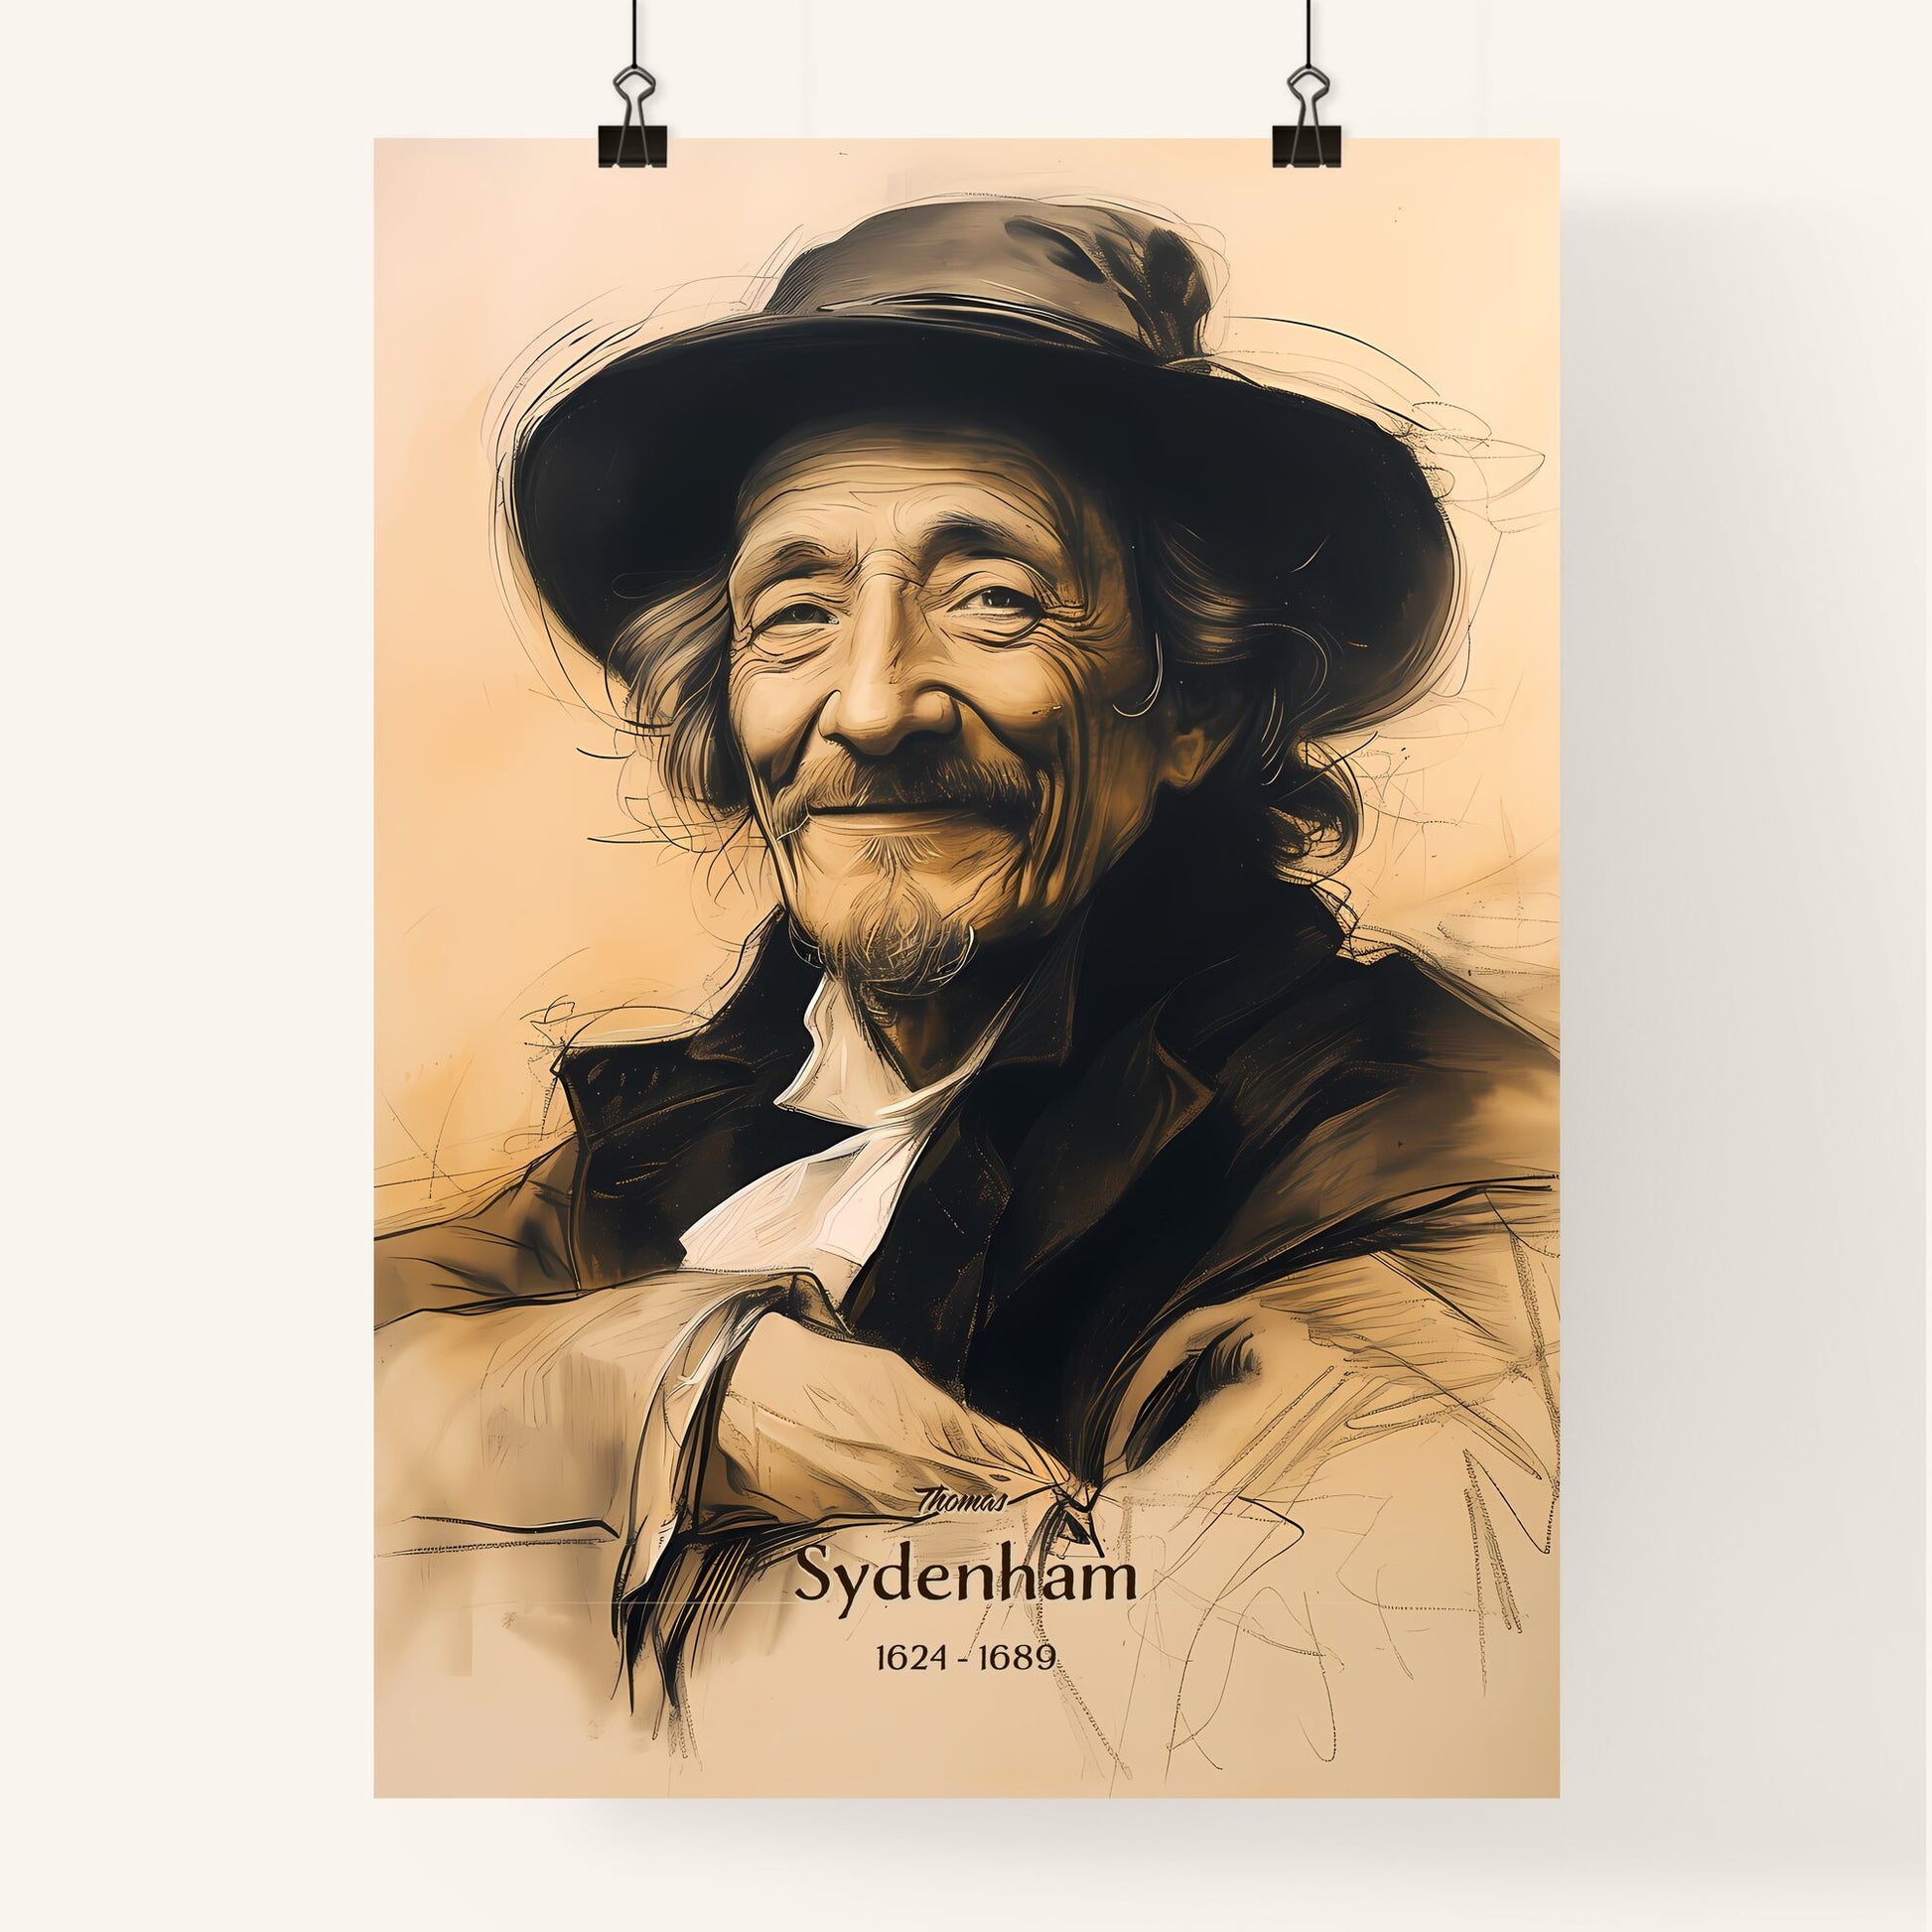 Thomas, Sydenham, 1624 - 1689, A Poster of a drawing of a man wearing a hat Default Title